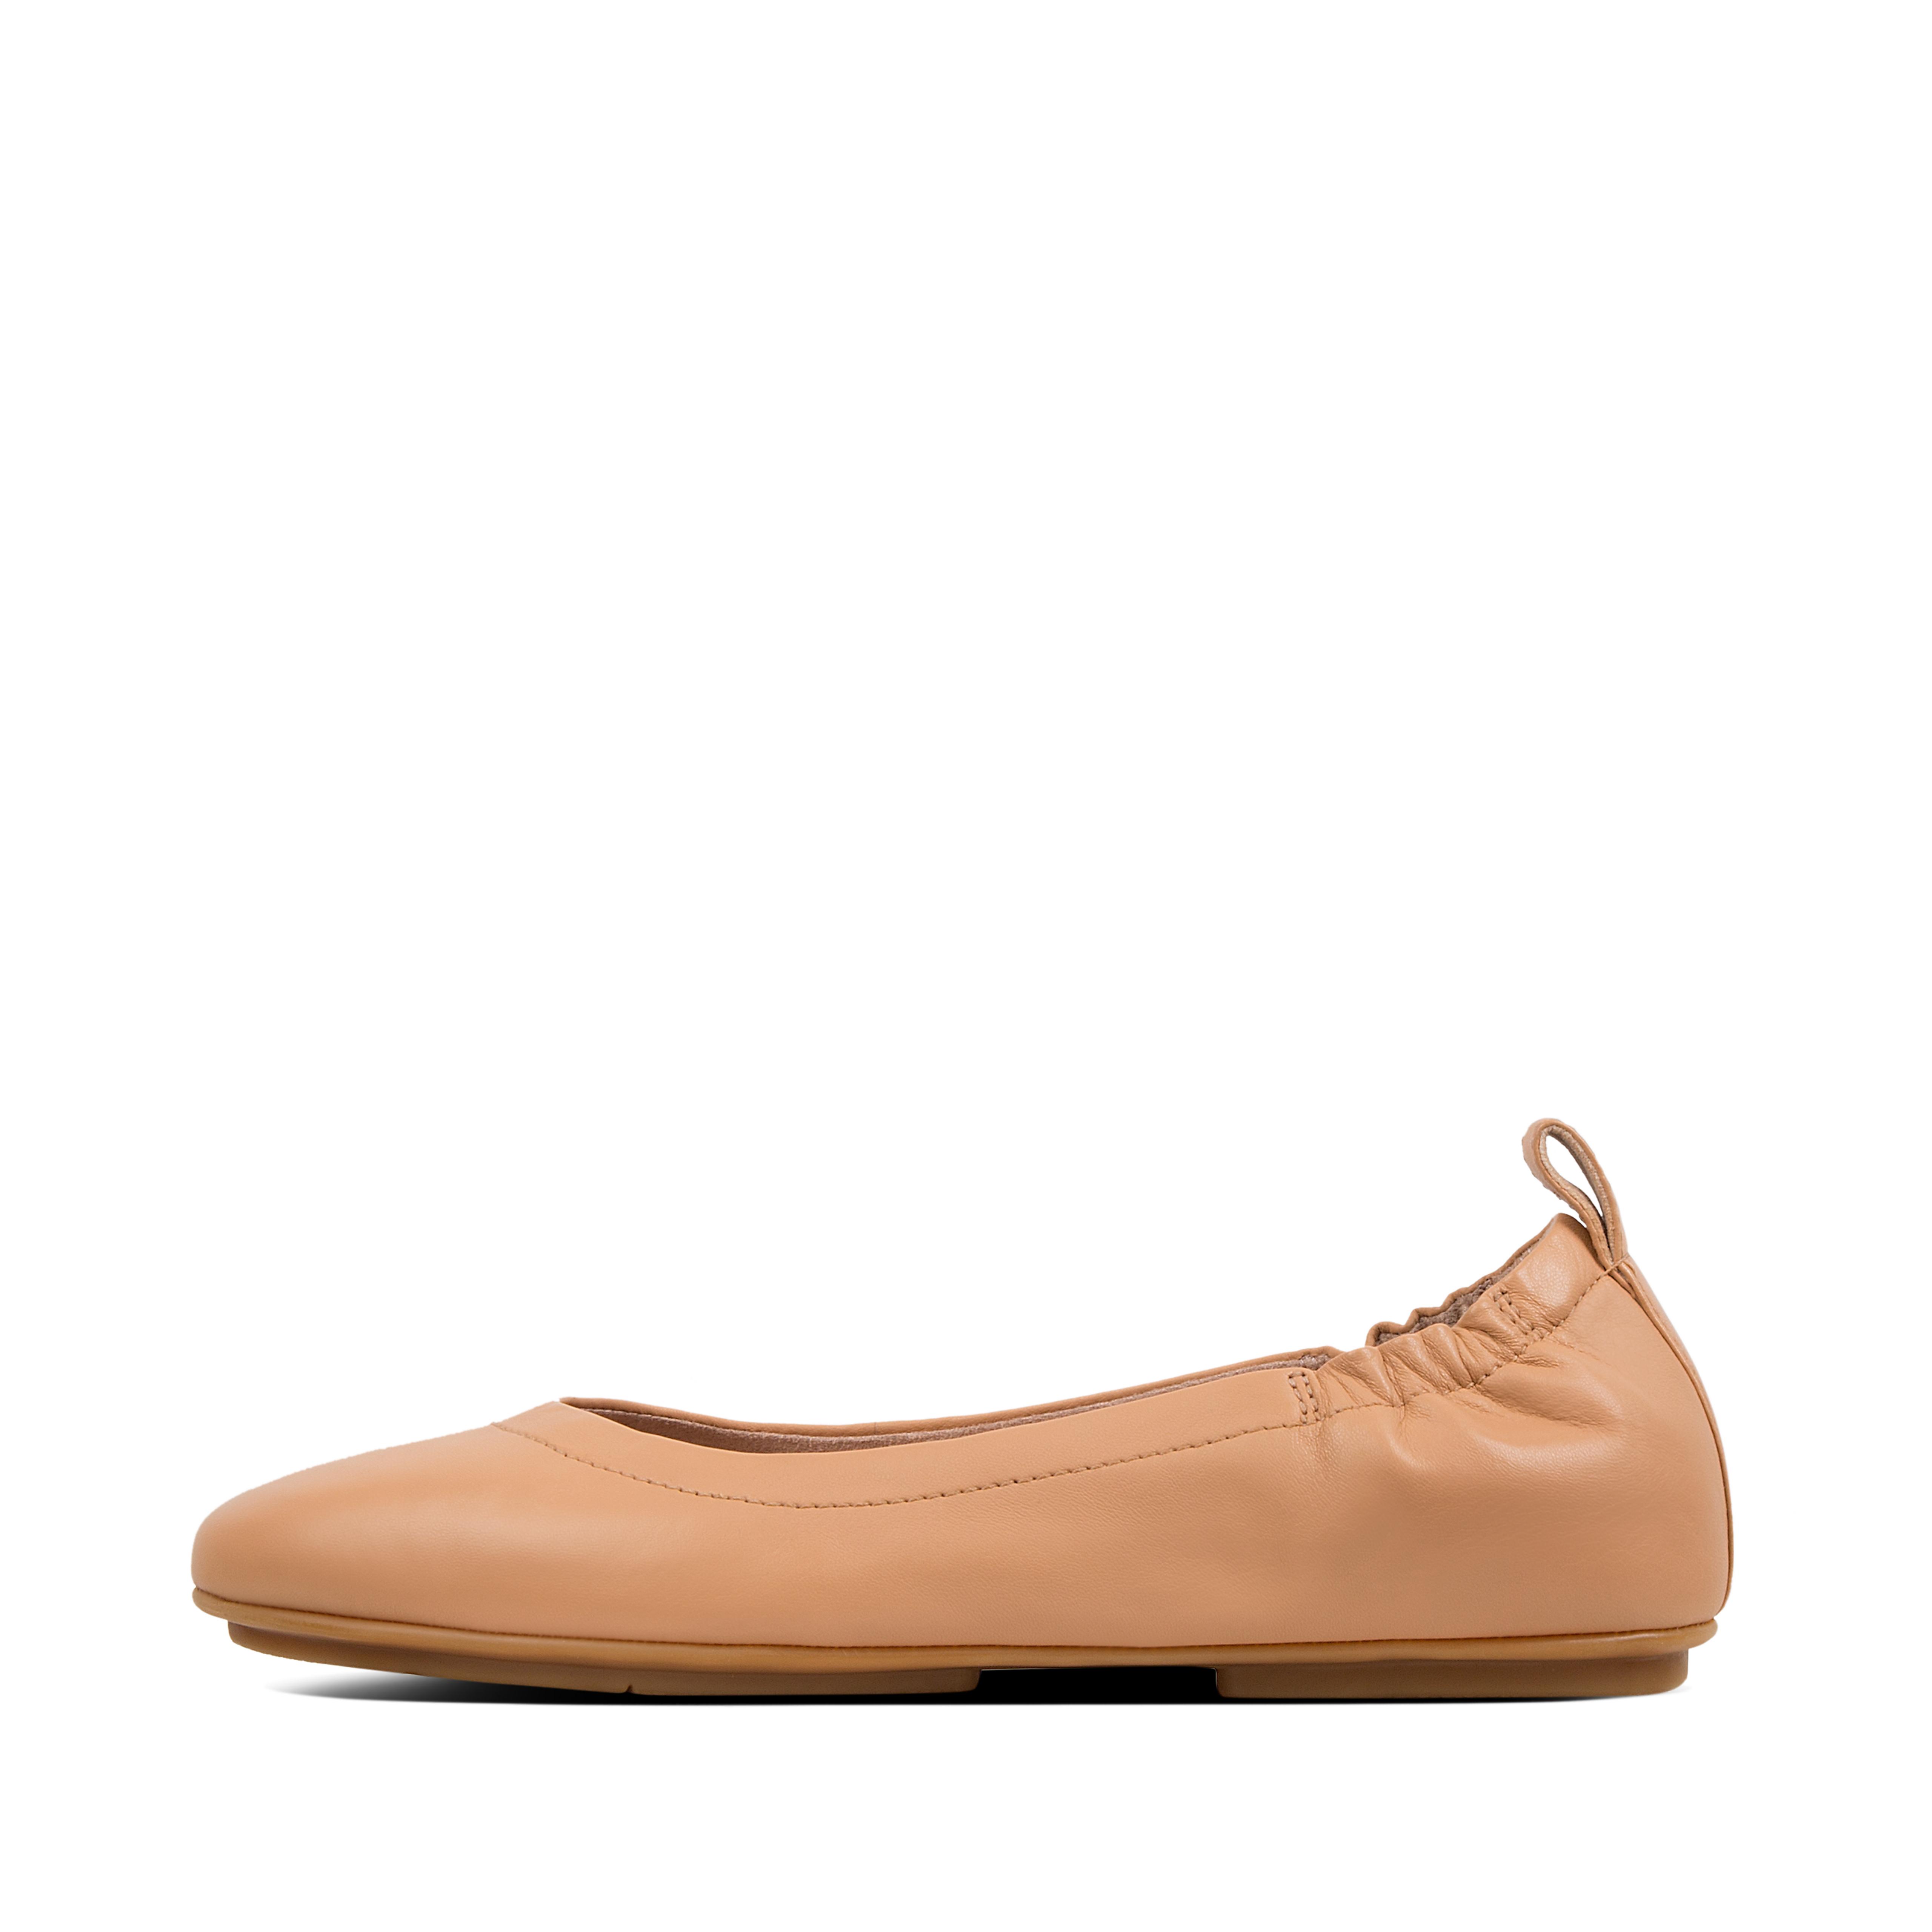 ballet slippers with rubber sole